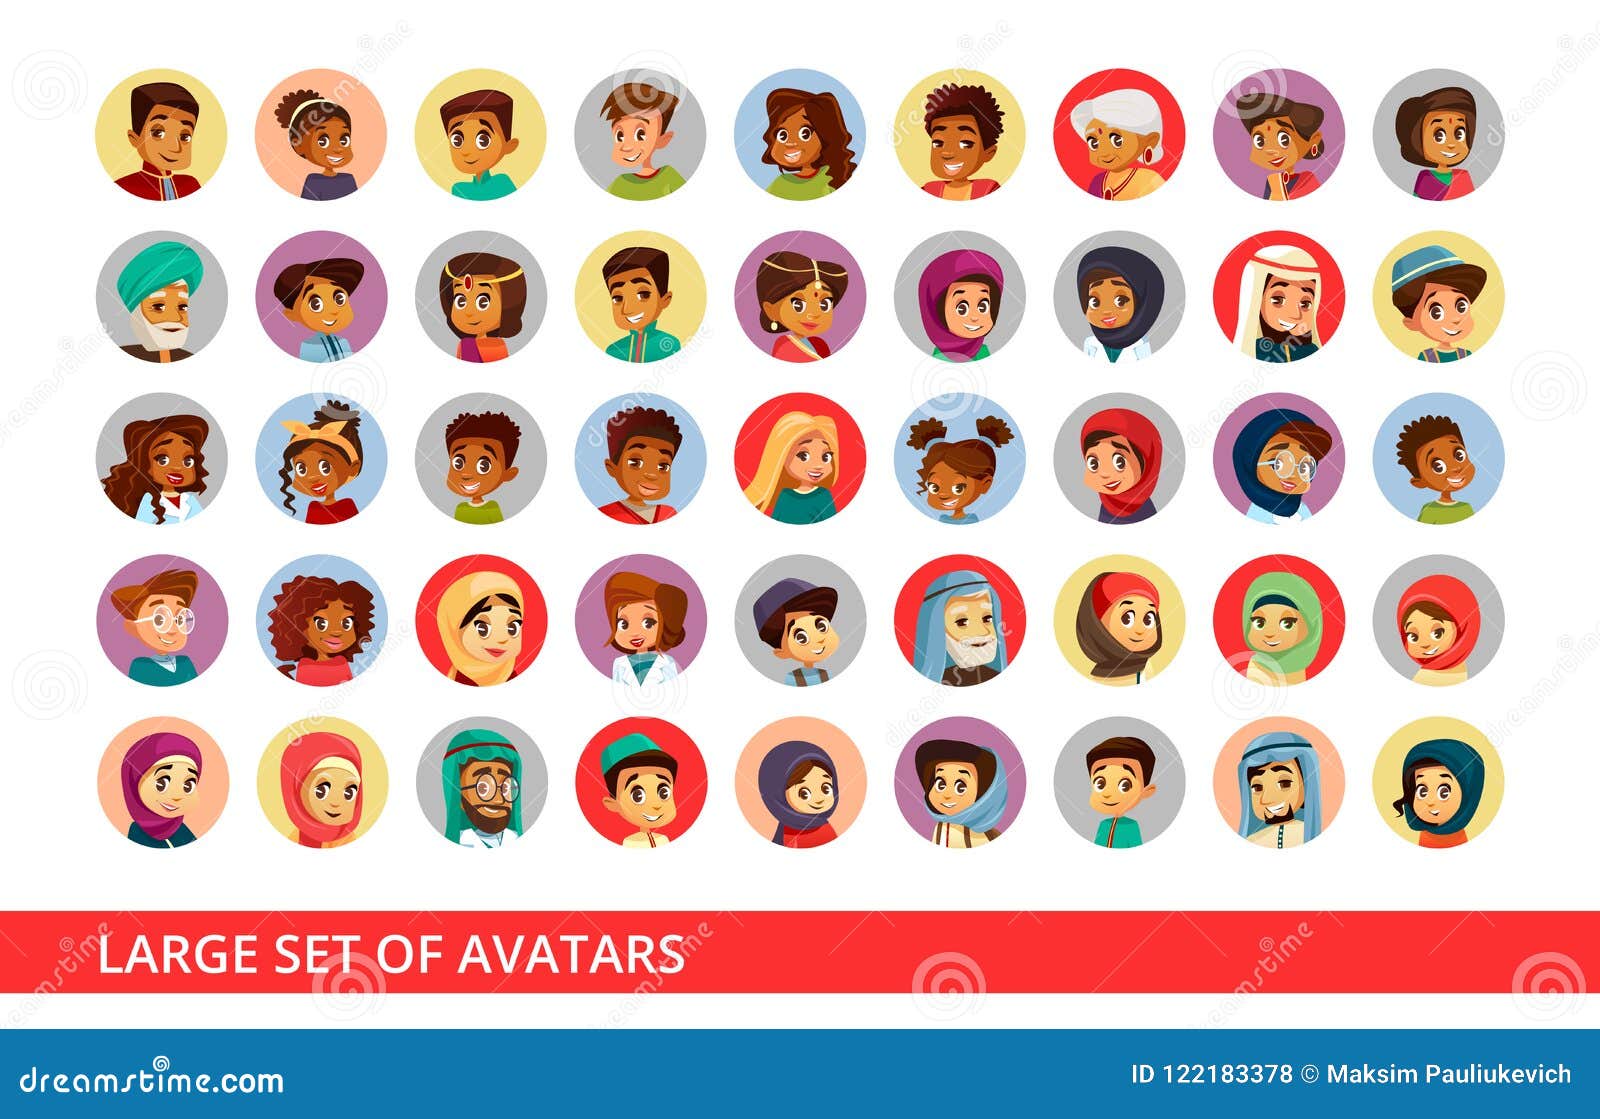 social network user avatars cartoon  of people and children different nationality for chat profile icons